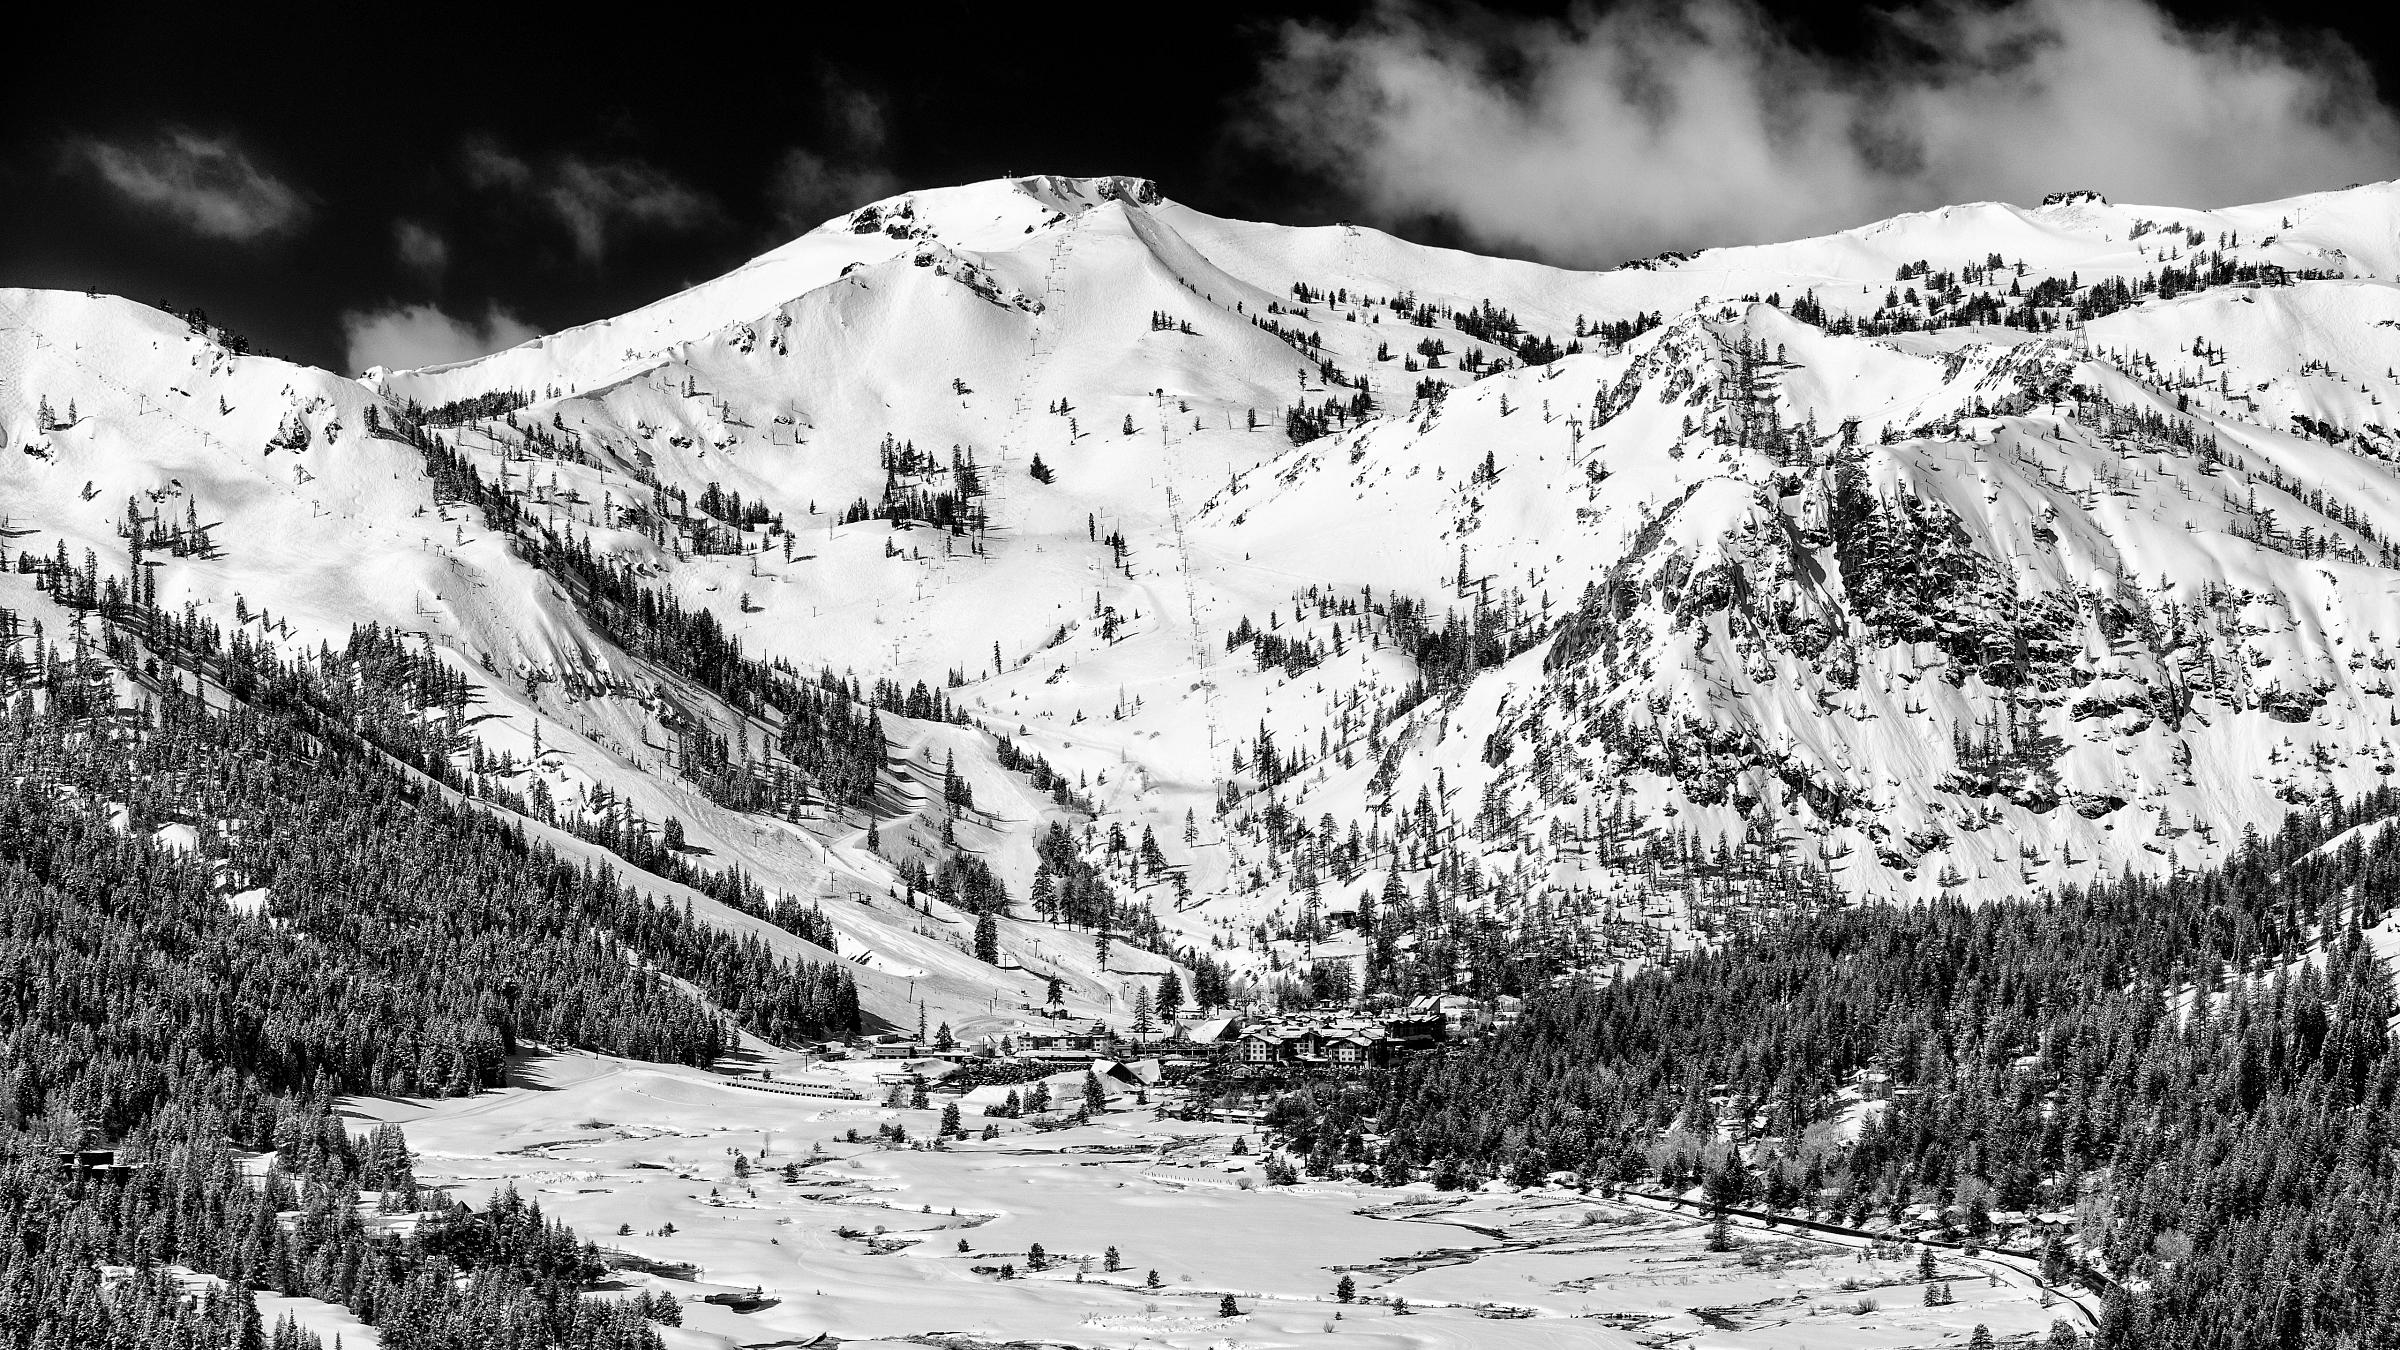 B&W Scenic from painted rock of Squaw Valley on a powder day